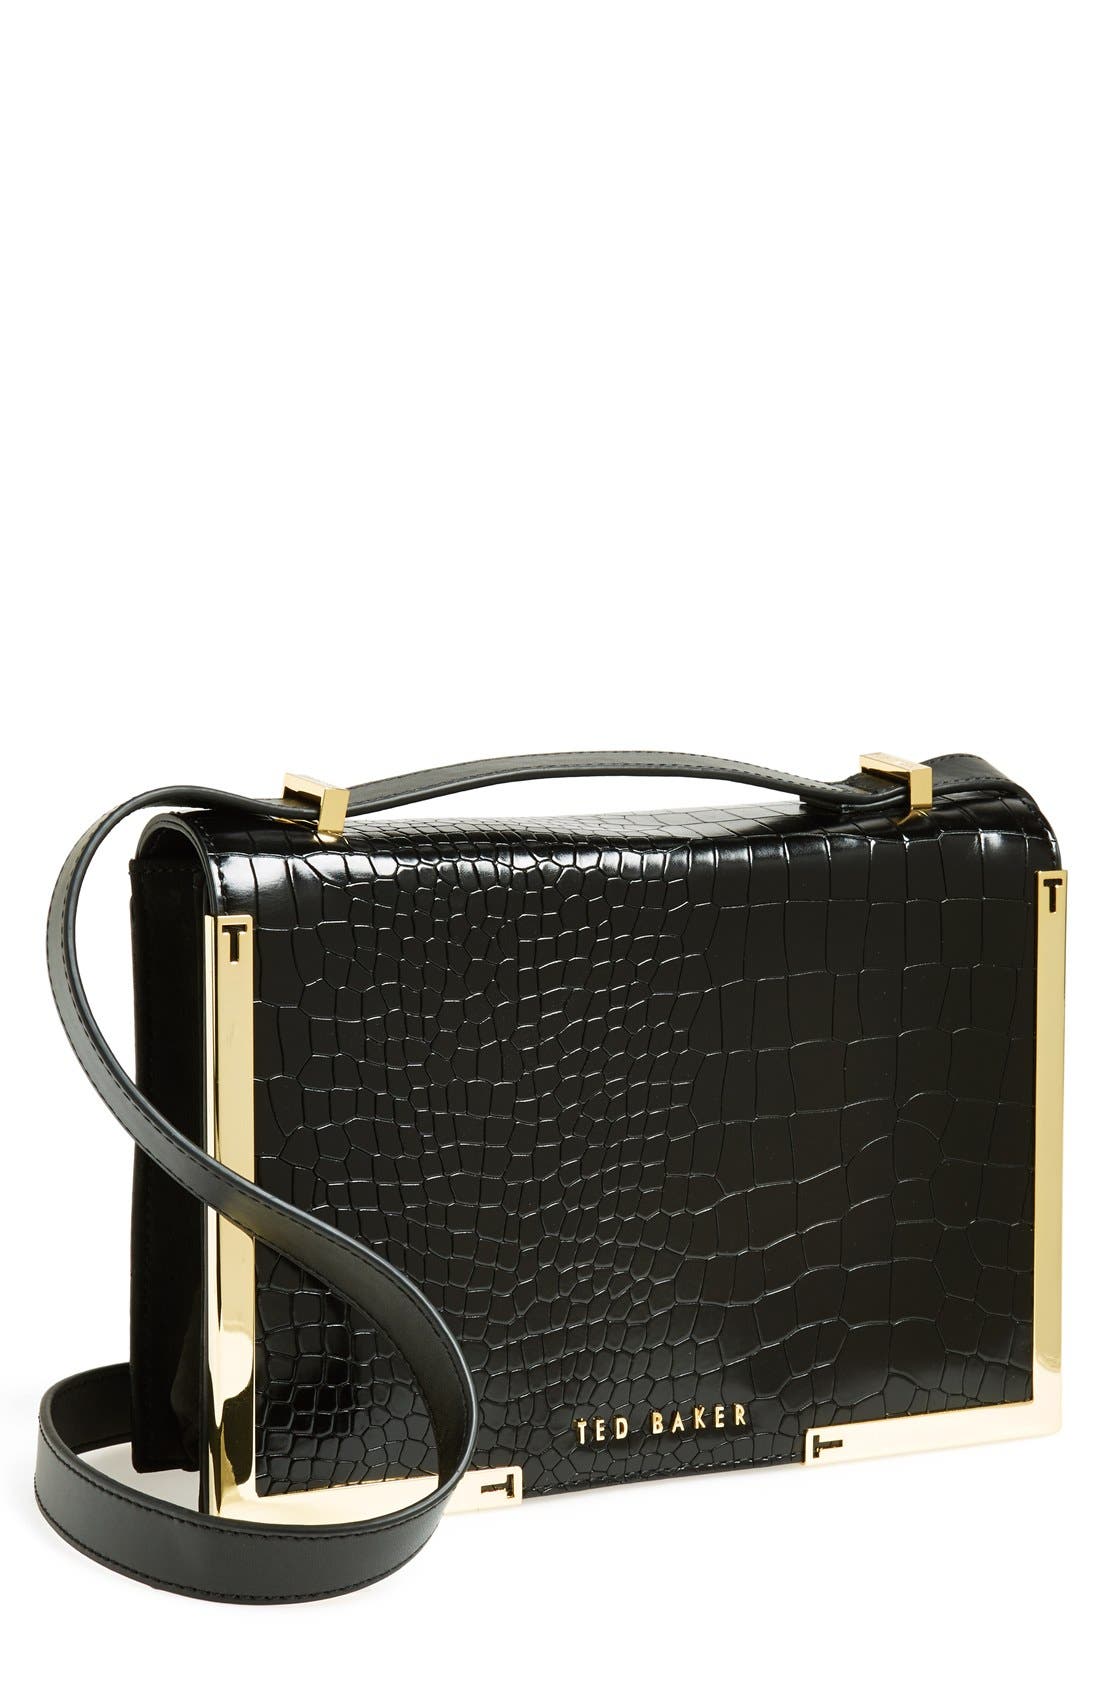 Ted Baker London Croc Embossed Leather 